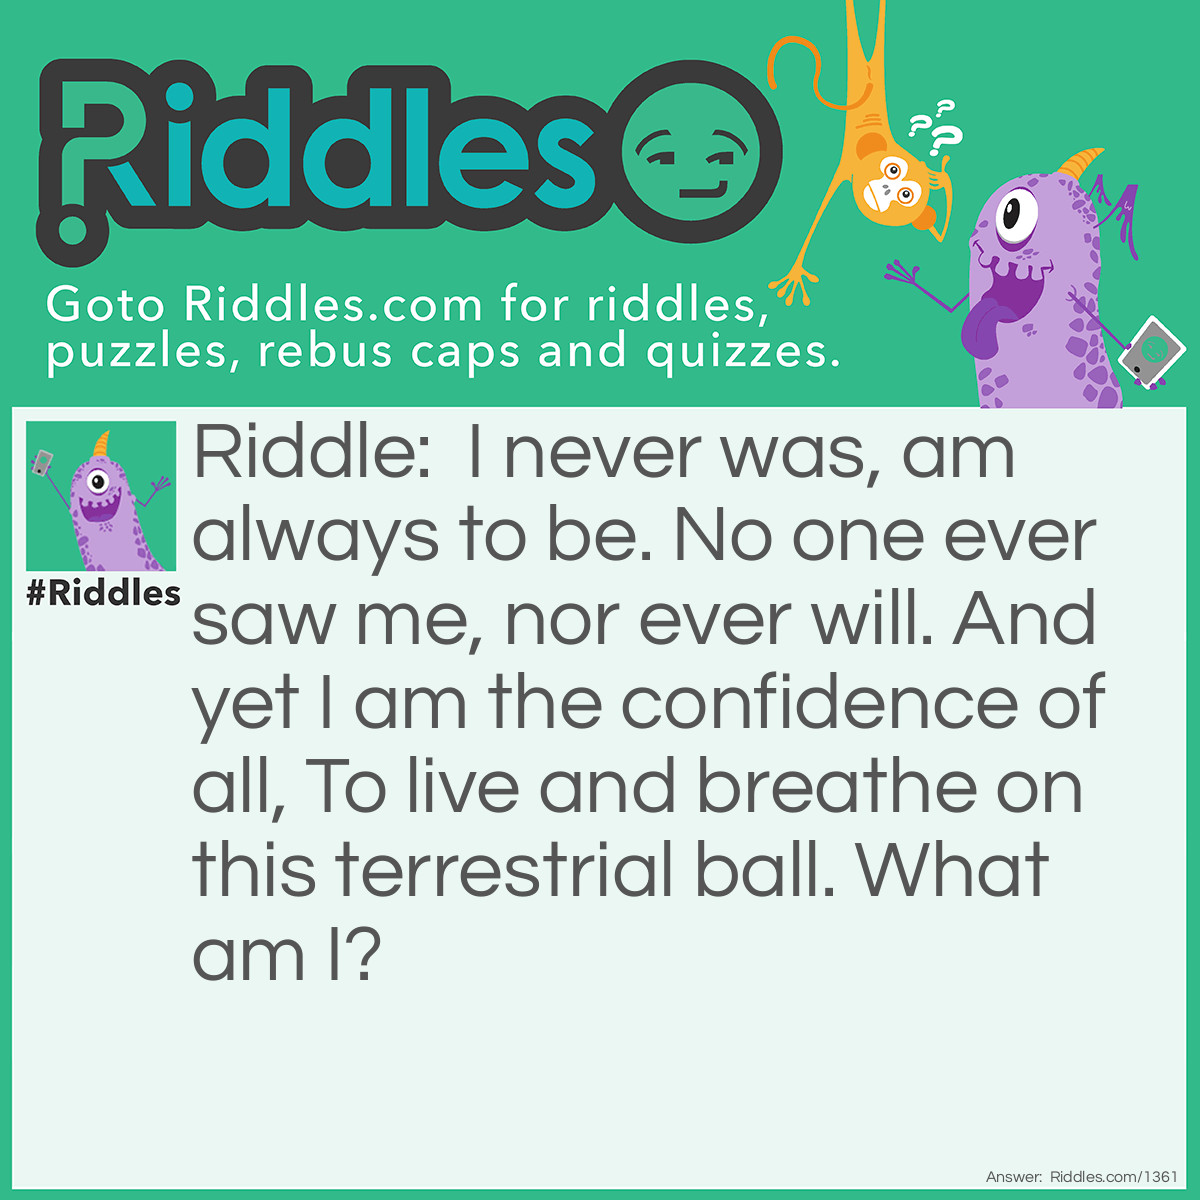 Riddle: I never was, am always to be. No one ever saw me, nor ever will. And yet I am the confidence of all, To live and breathe on this terrestrial ball.
What am I? Answer: Tomorrow.